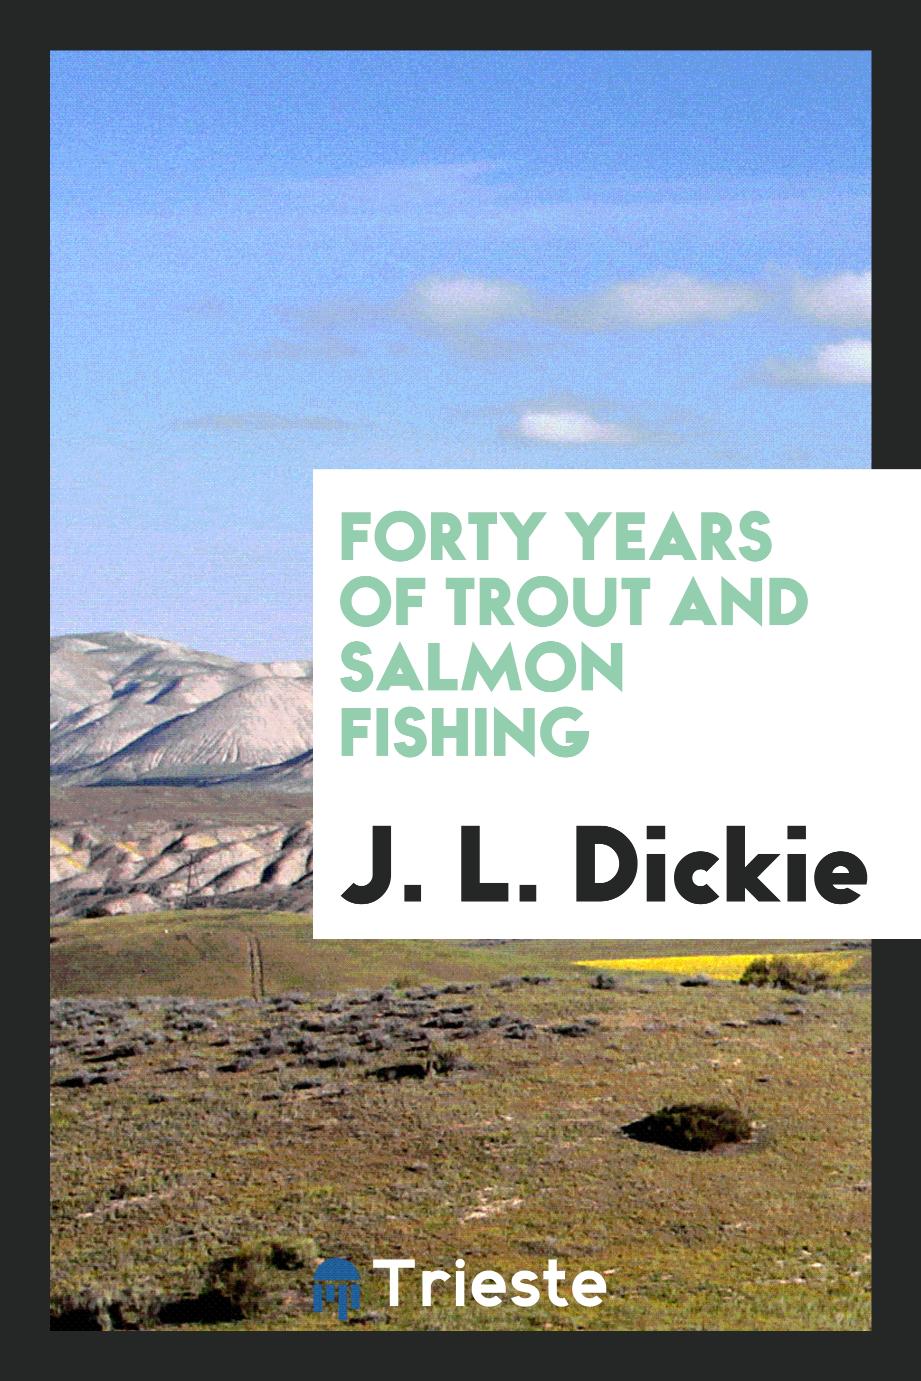 Forty years of trout and salmon fishing